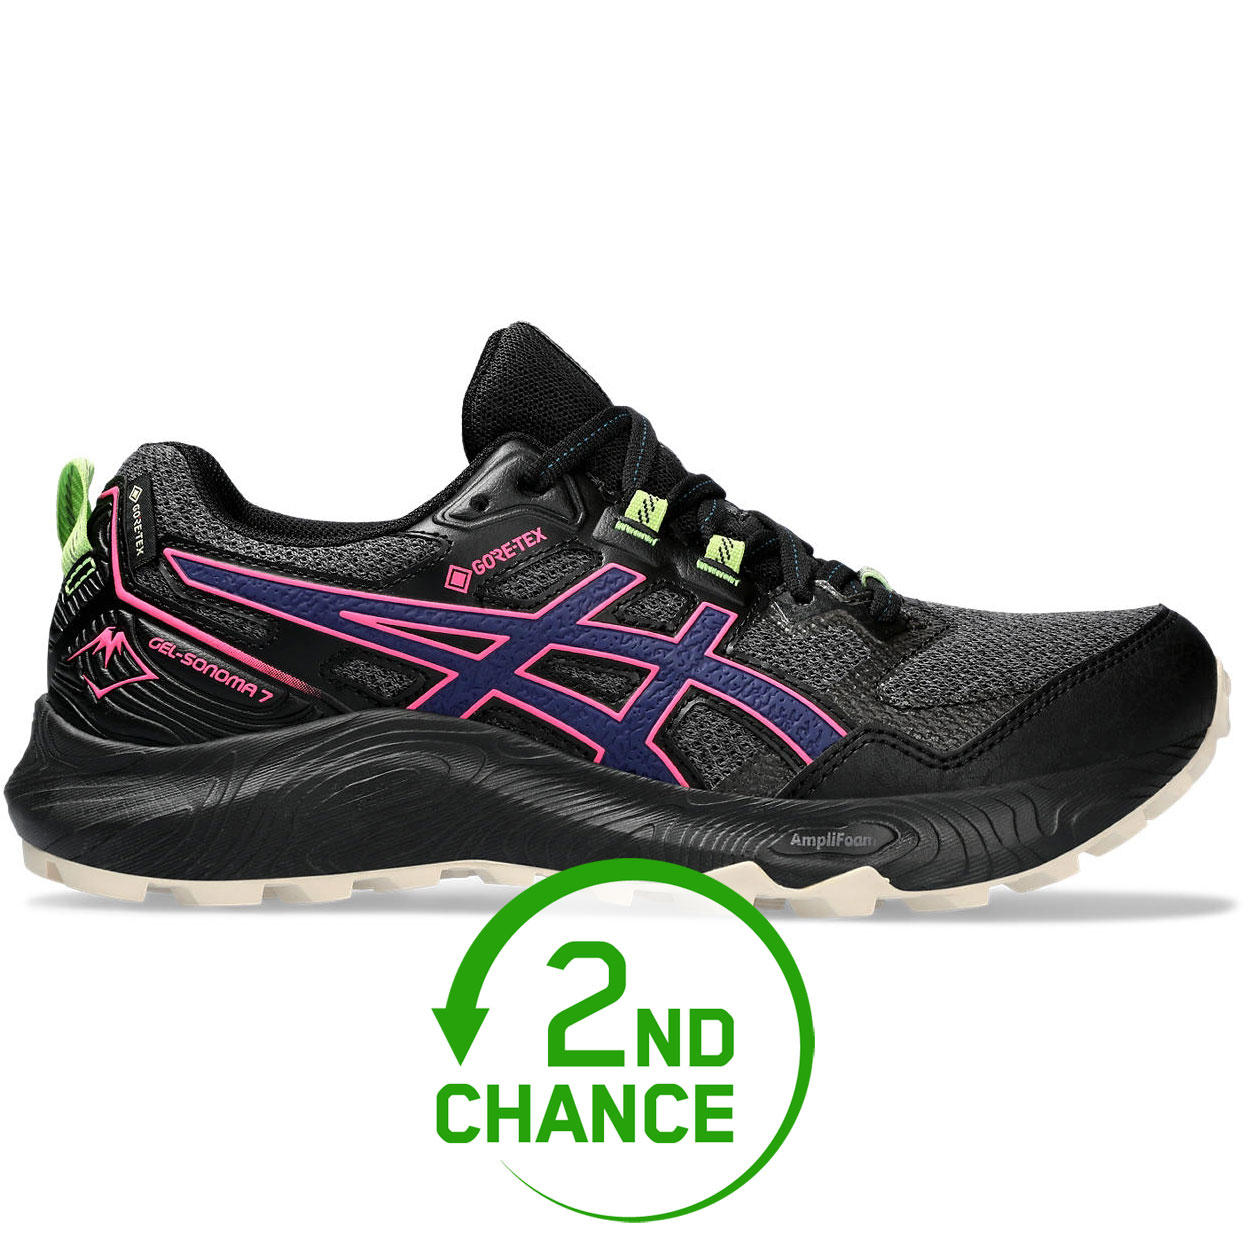 Picture of asics Gel-Sonoma 7 GTX Trailrunning Shoes Women - graphite grey/deep ocean - 2nd Choice